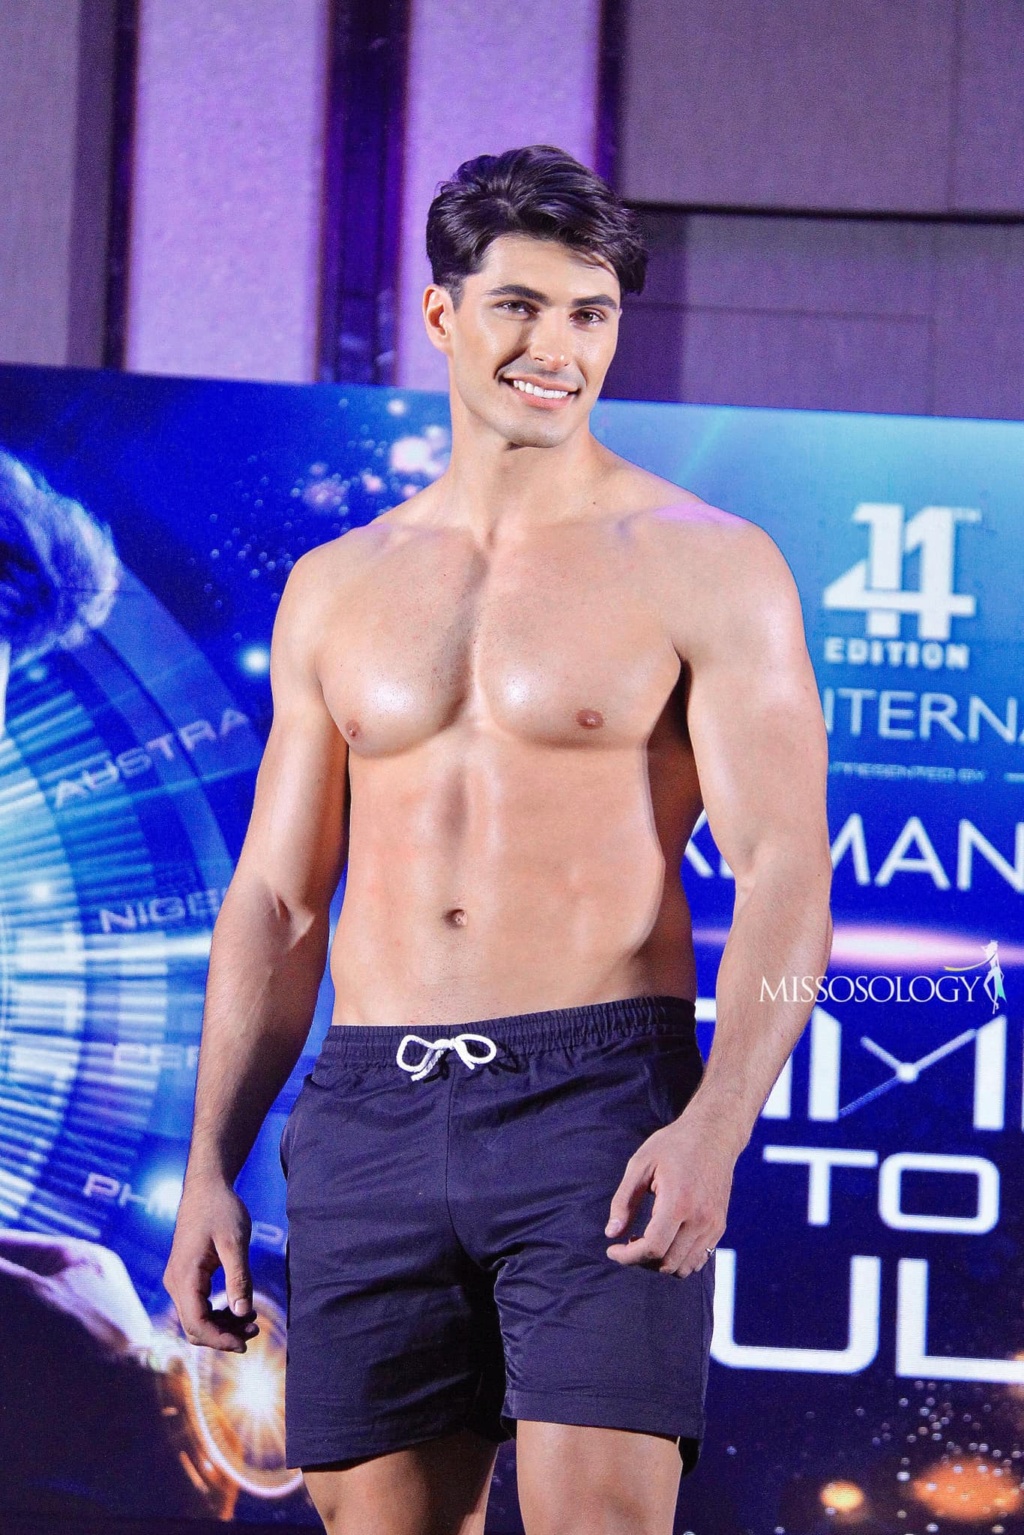 14th Mister International in Manila, Philippines - Oct 30th, 2022 - Winner is Dominican Republic 31283111